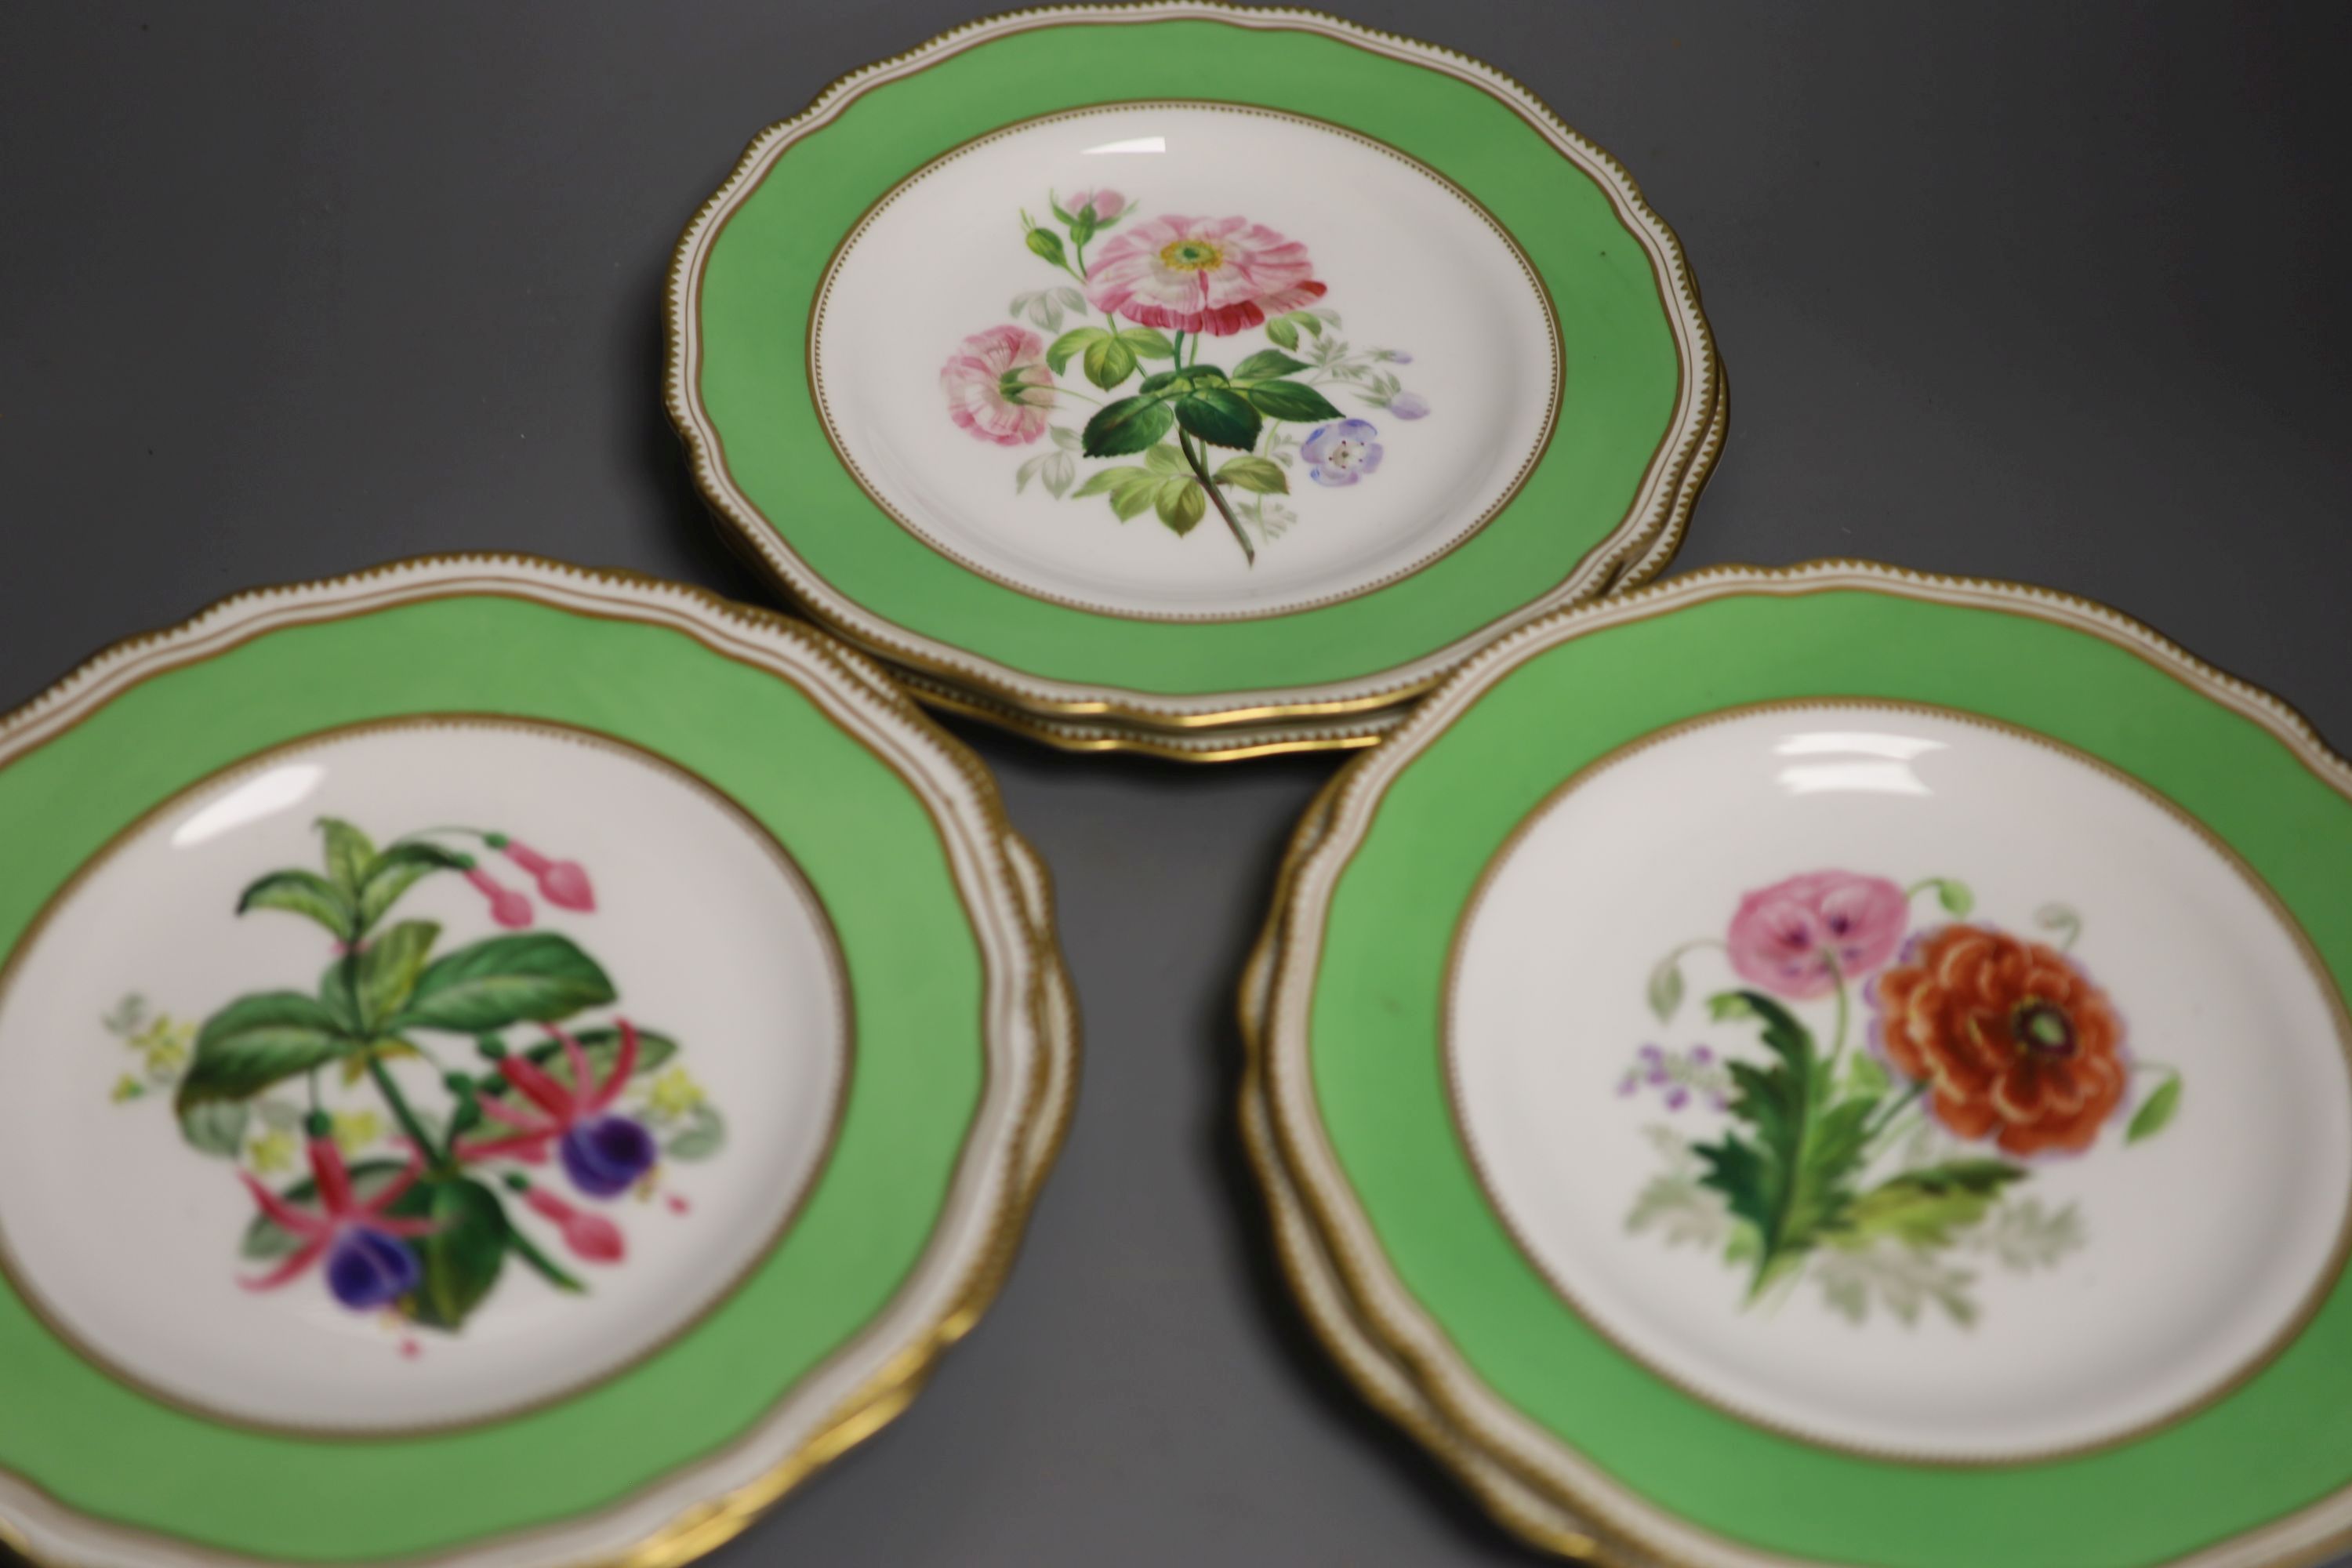 A Copeland set of six plates painted with sprays of flowers, 1851-1885 D.1836, diameter 23cm